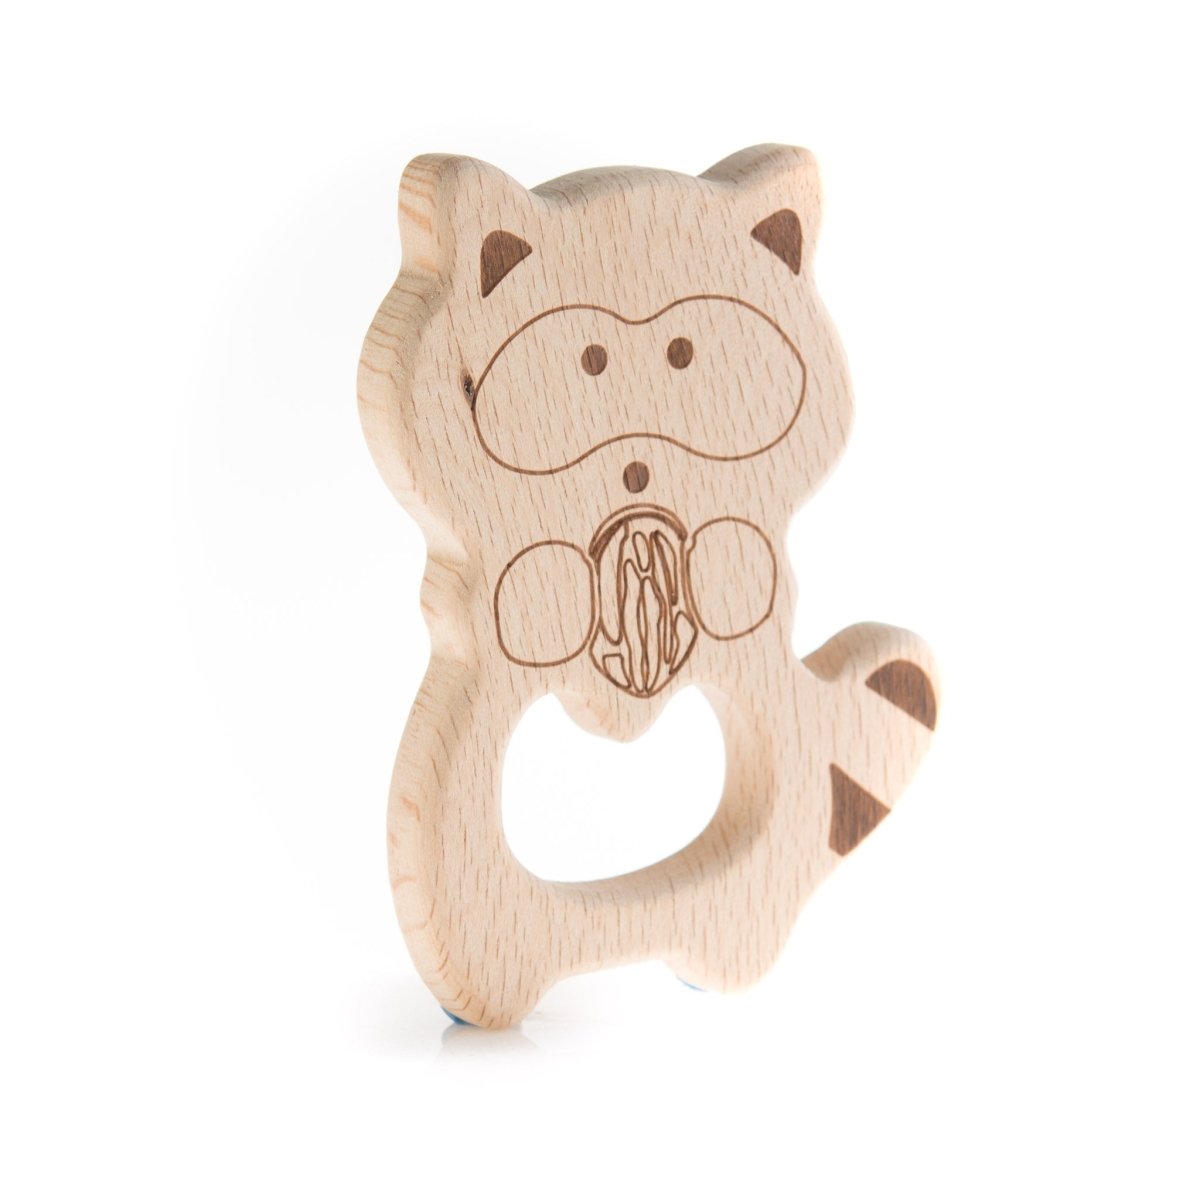 Wood Rings & Pendants Large - Beech Wood Raccoon from Cara & Co Craft Supply